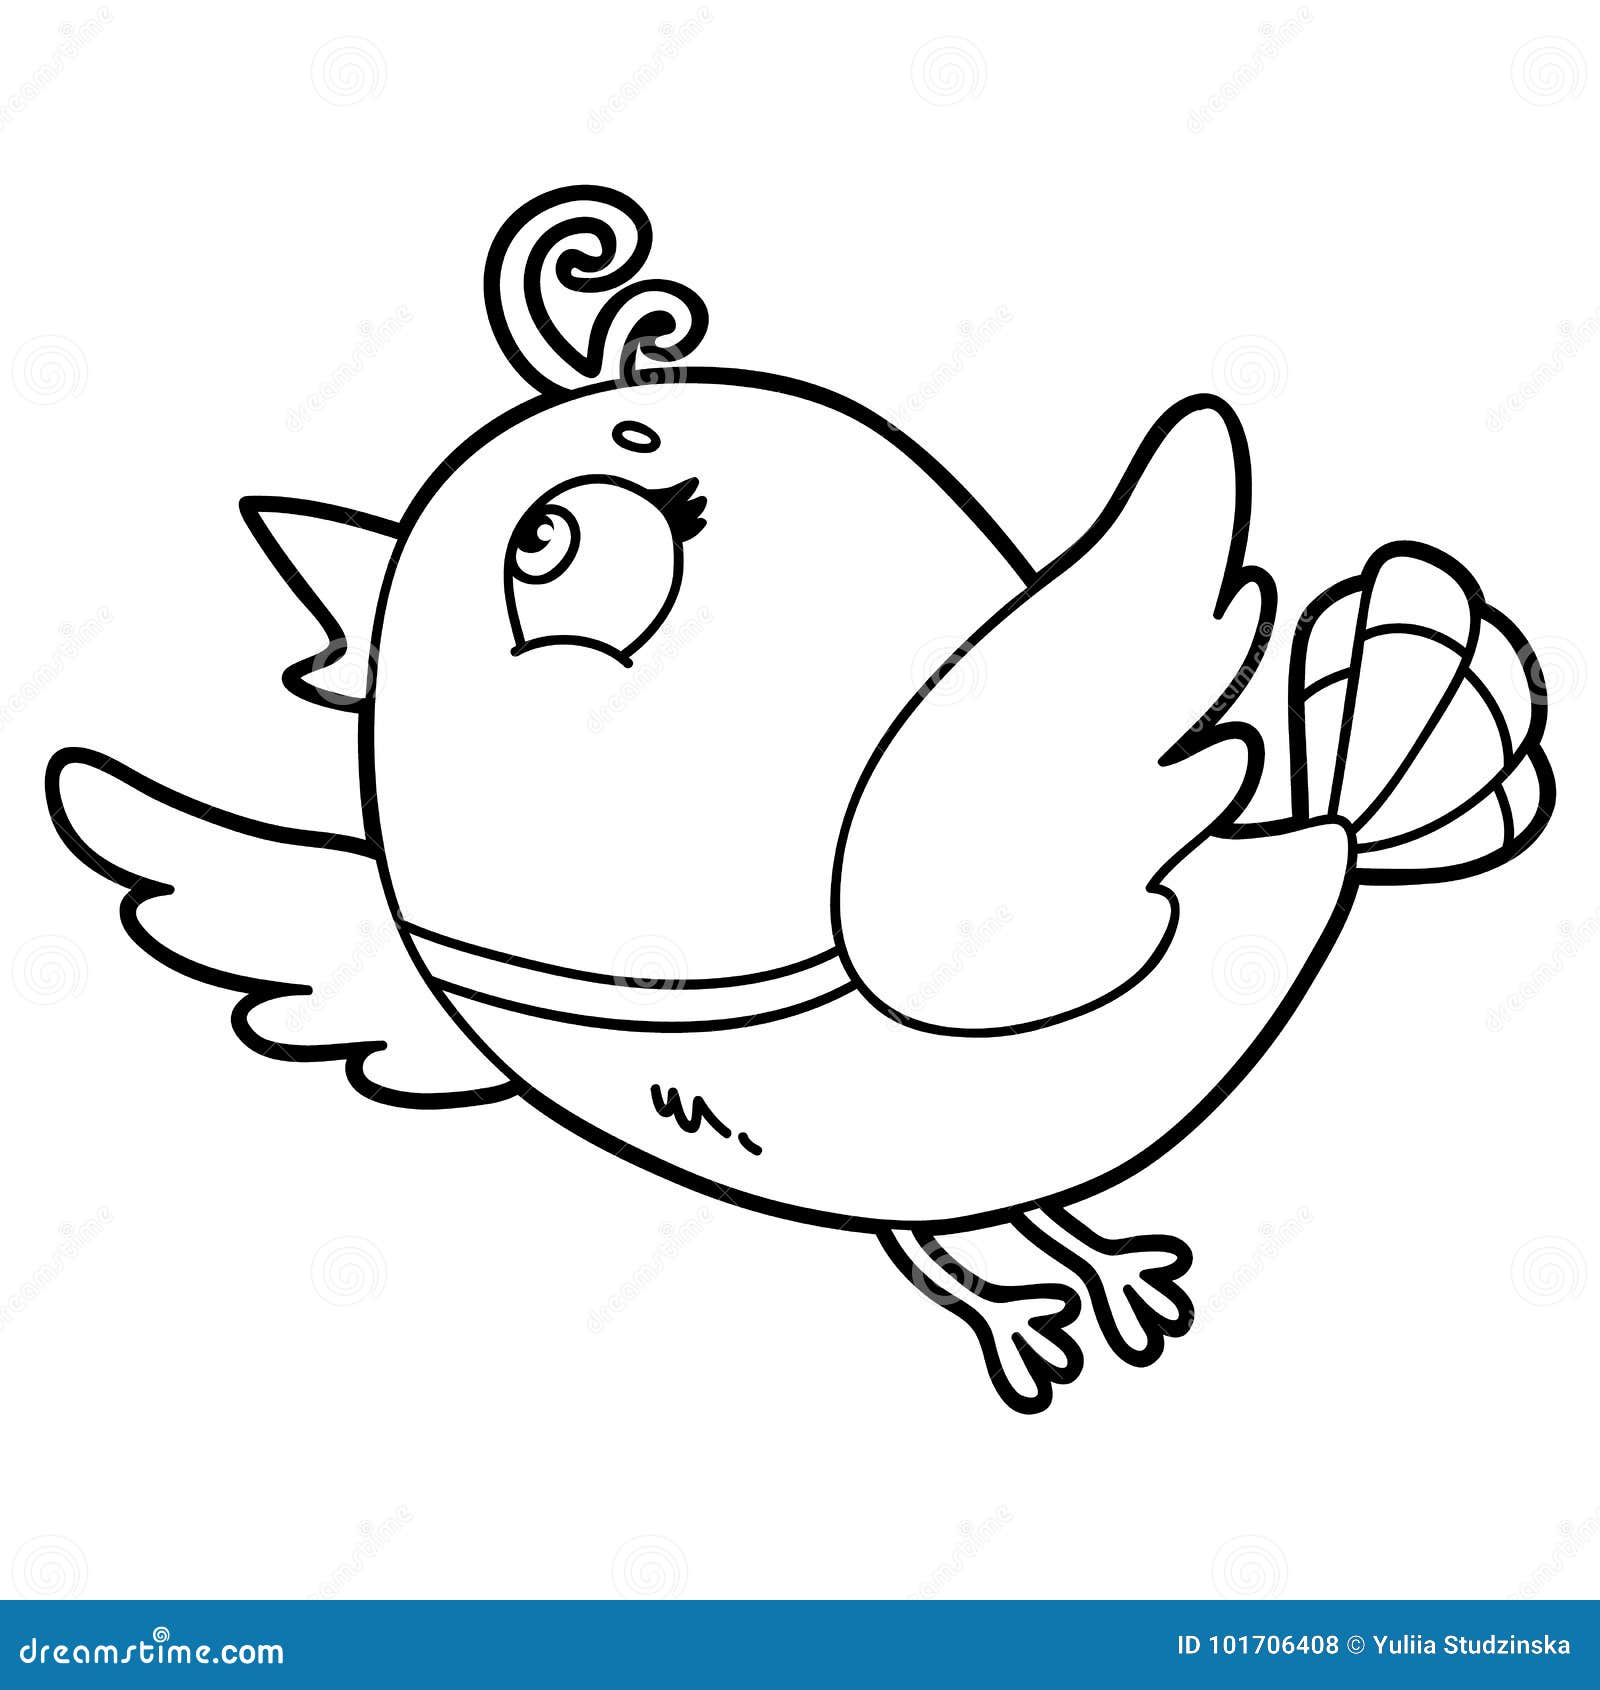 Outline bird stock vector. Illustration of painting - 101706408